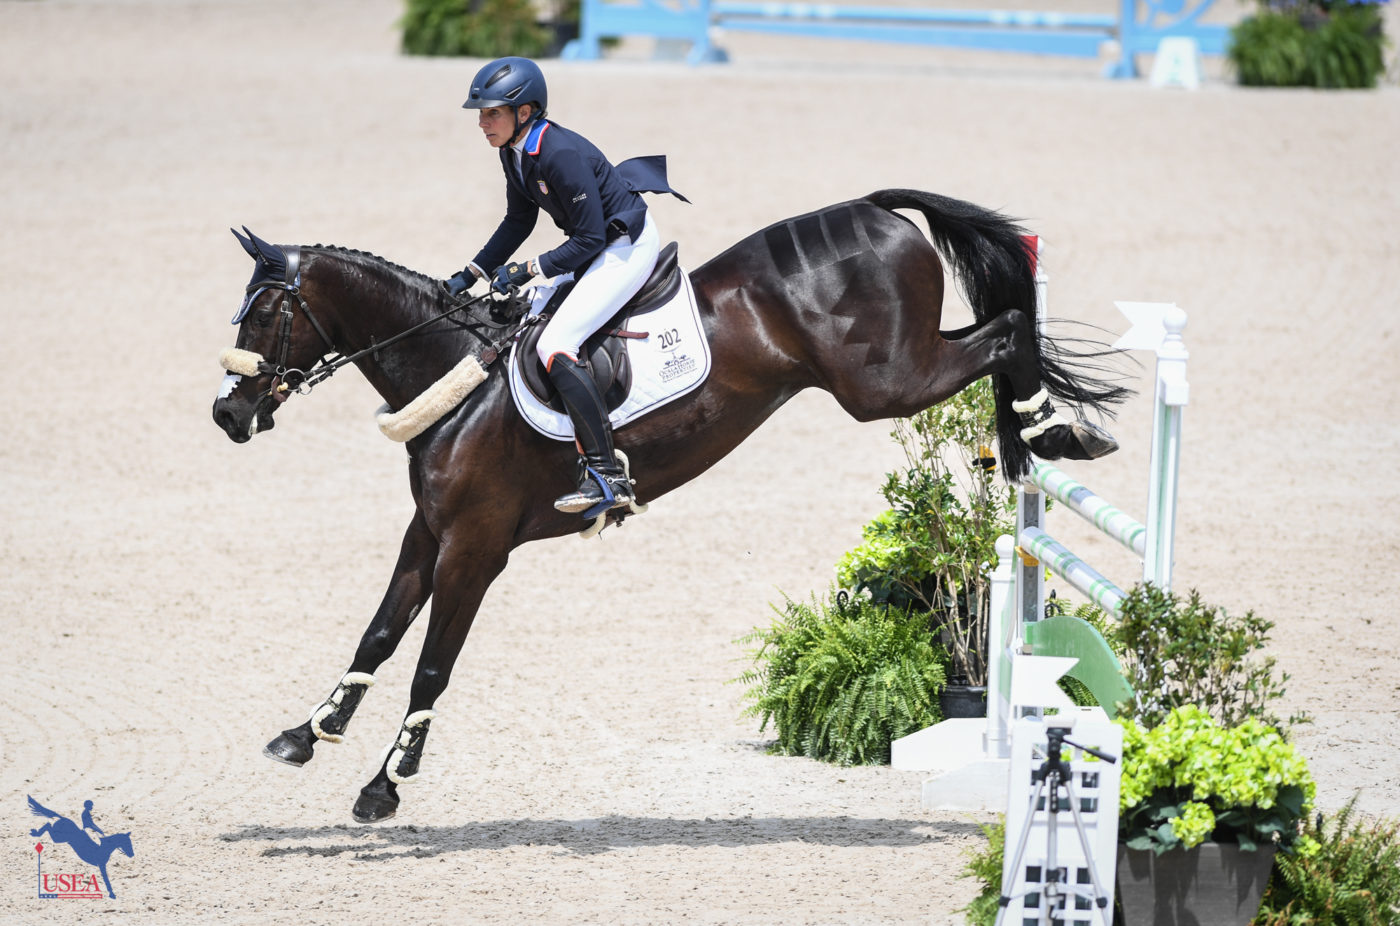 Liz Halliday-Sharp and Cooley Nutcracker put in a stylish clear round in the CCI4*-L. USEA/Lindsay Berreth photo